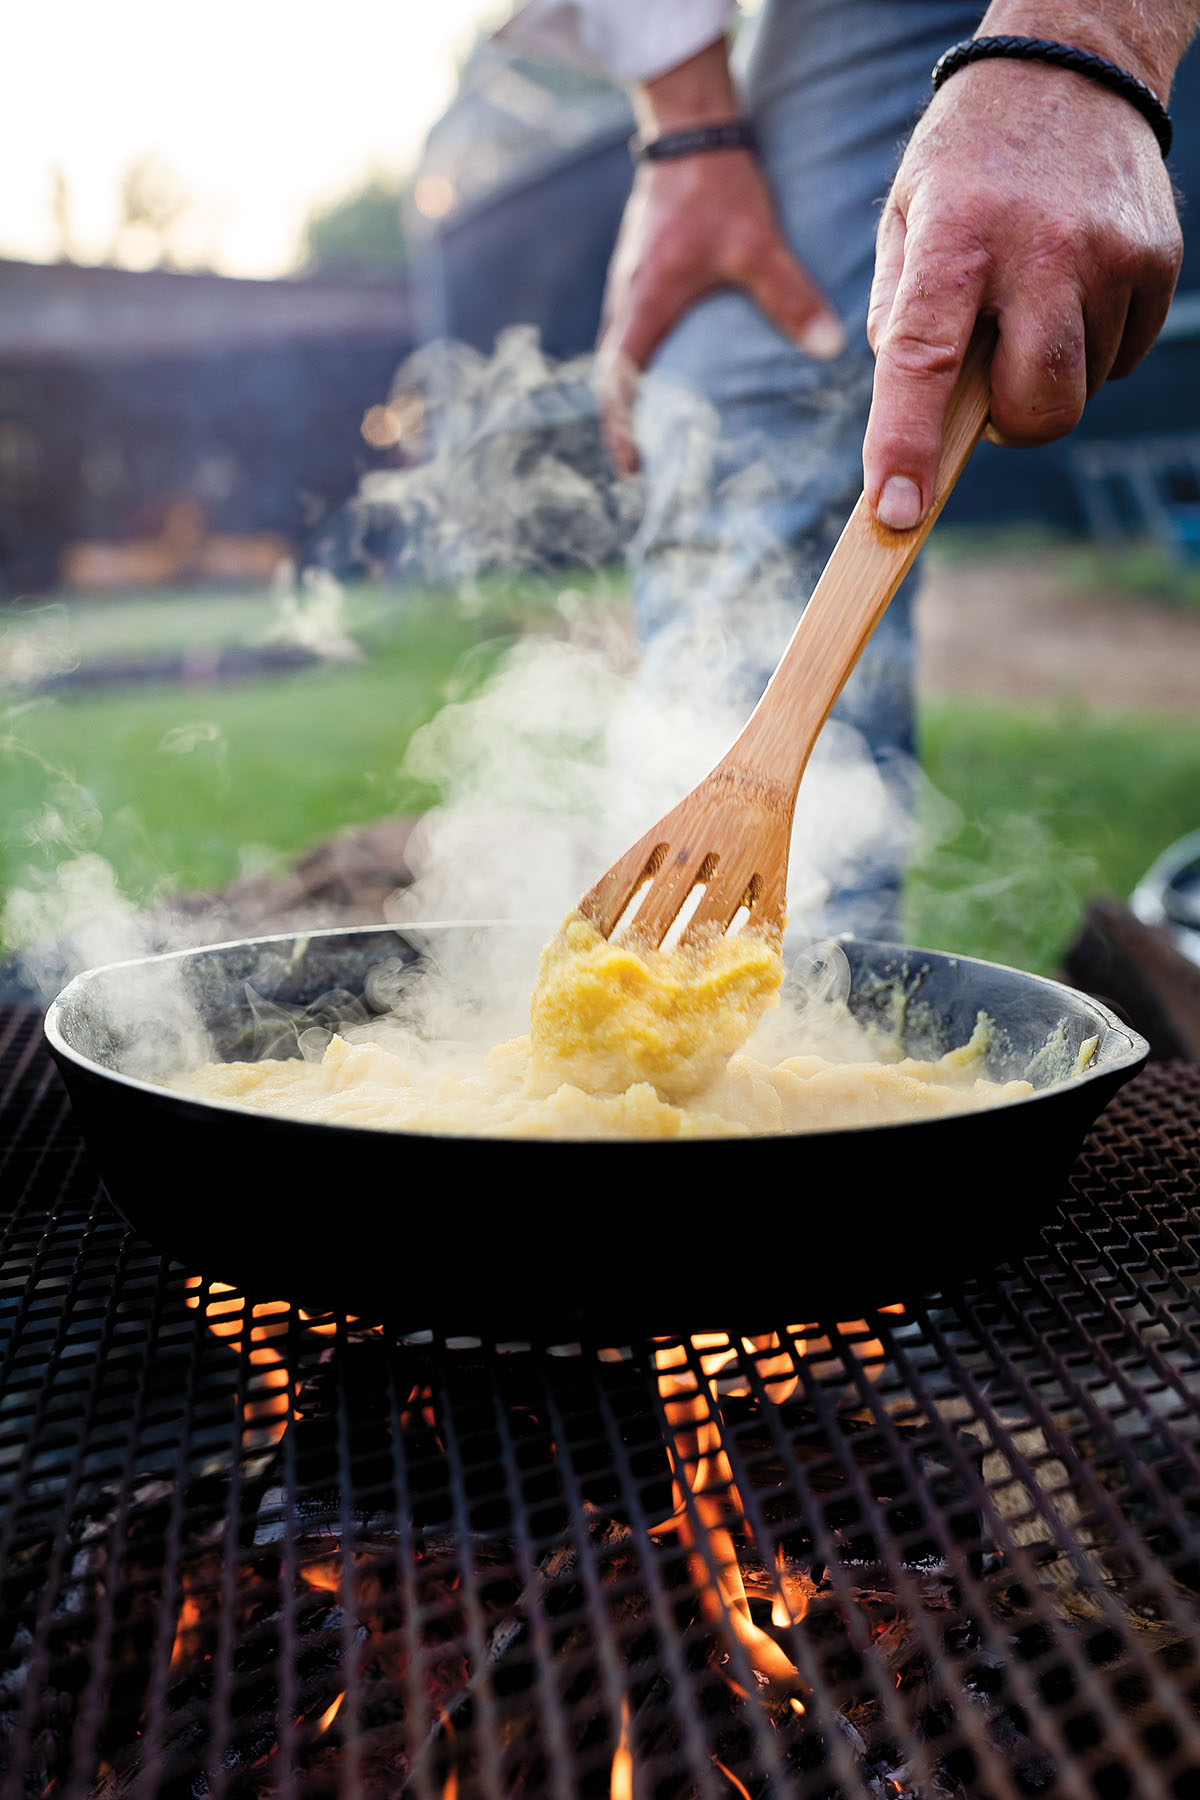 A woden spoon stirs steaming corn inside a cast iron skillet